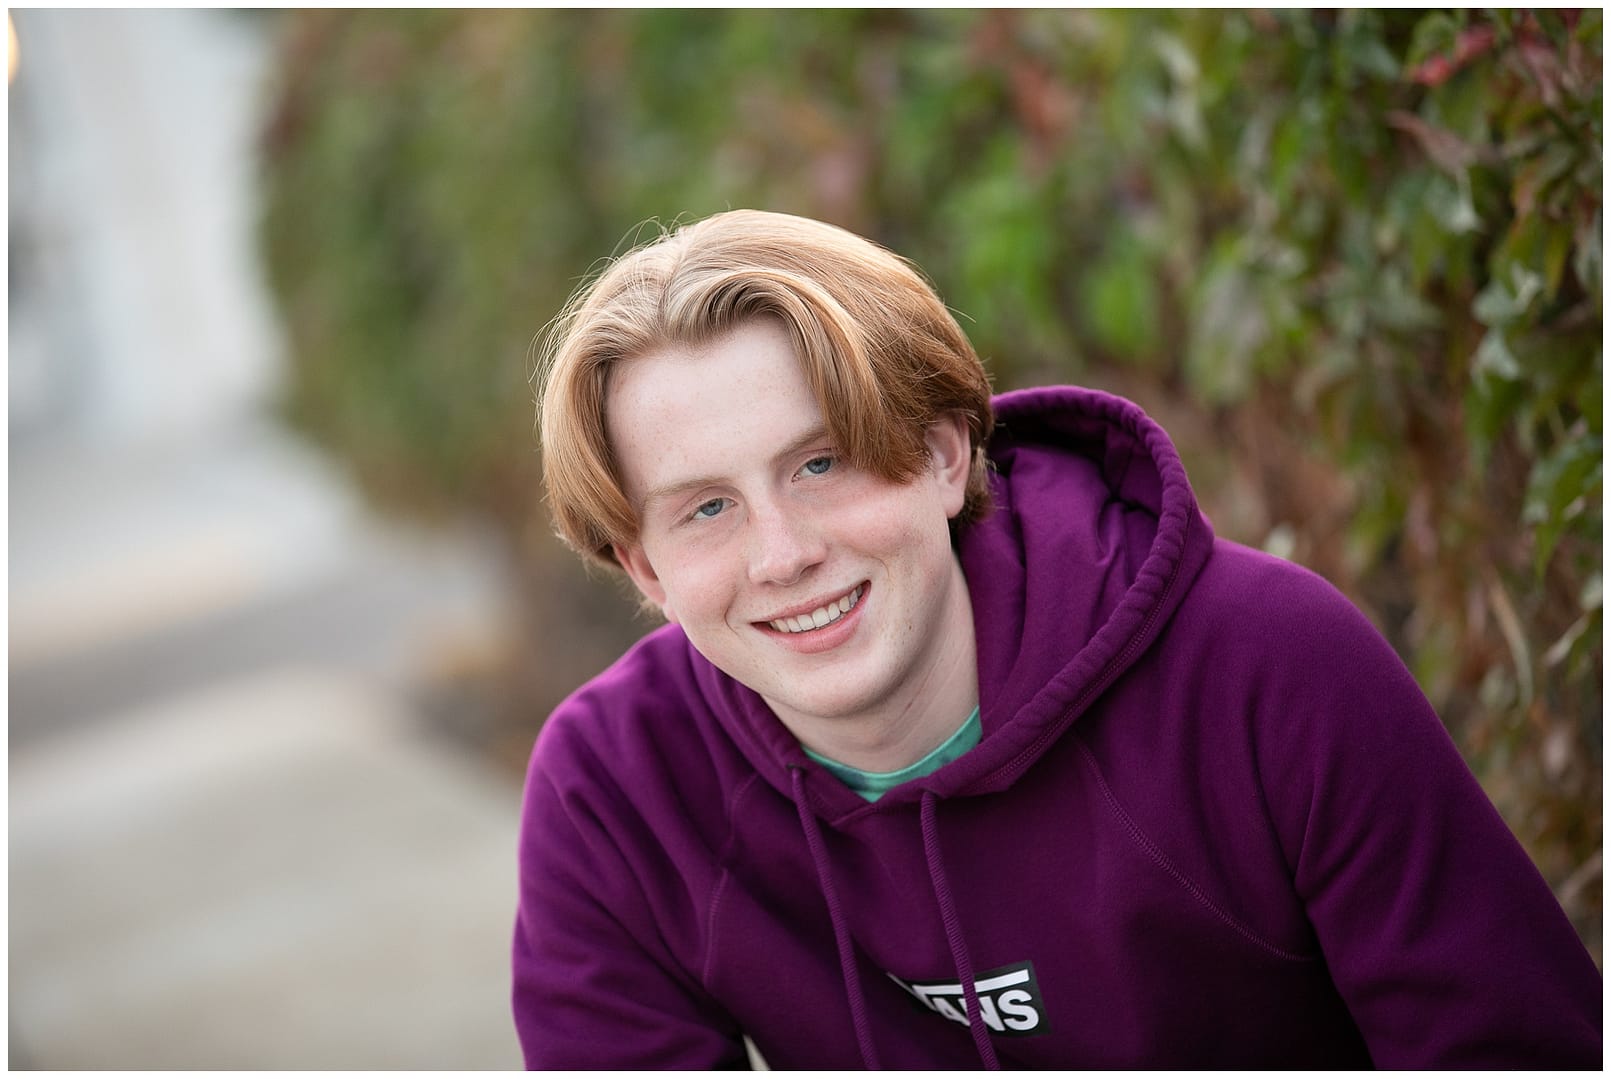 Boise teen takes his picture. Photos by Tiffany Hix Photography.